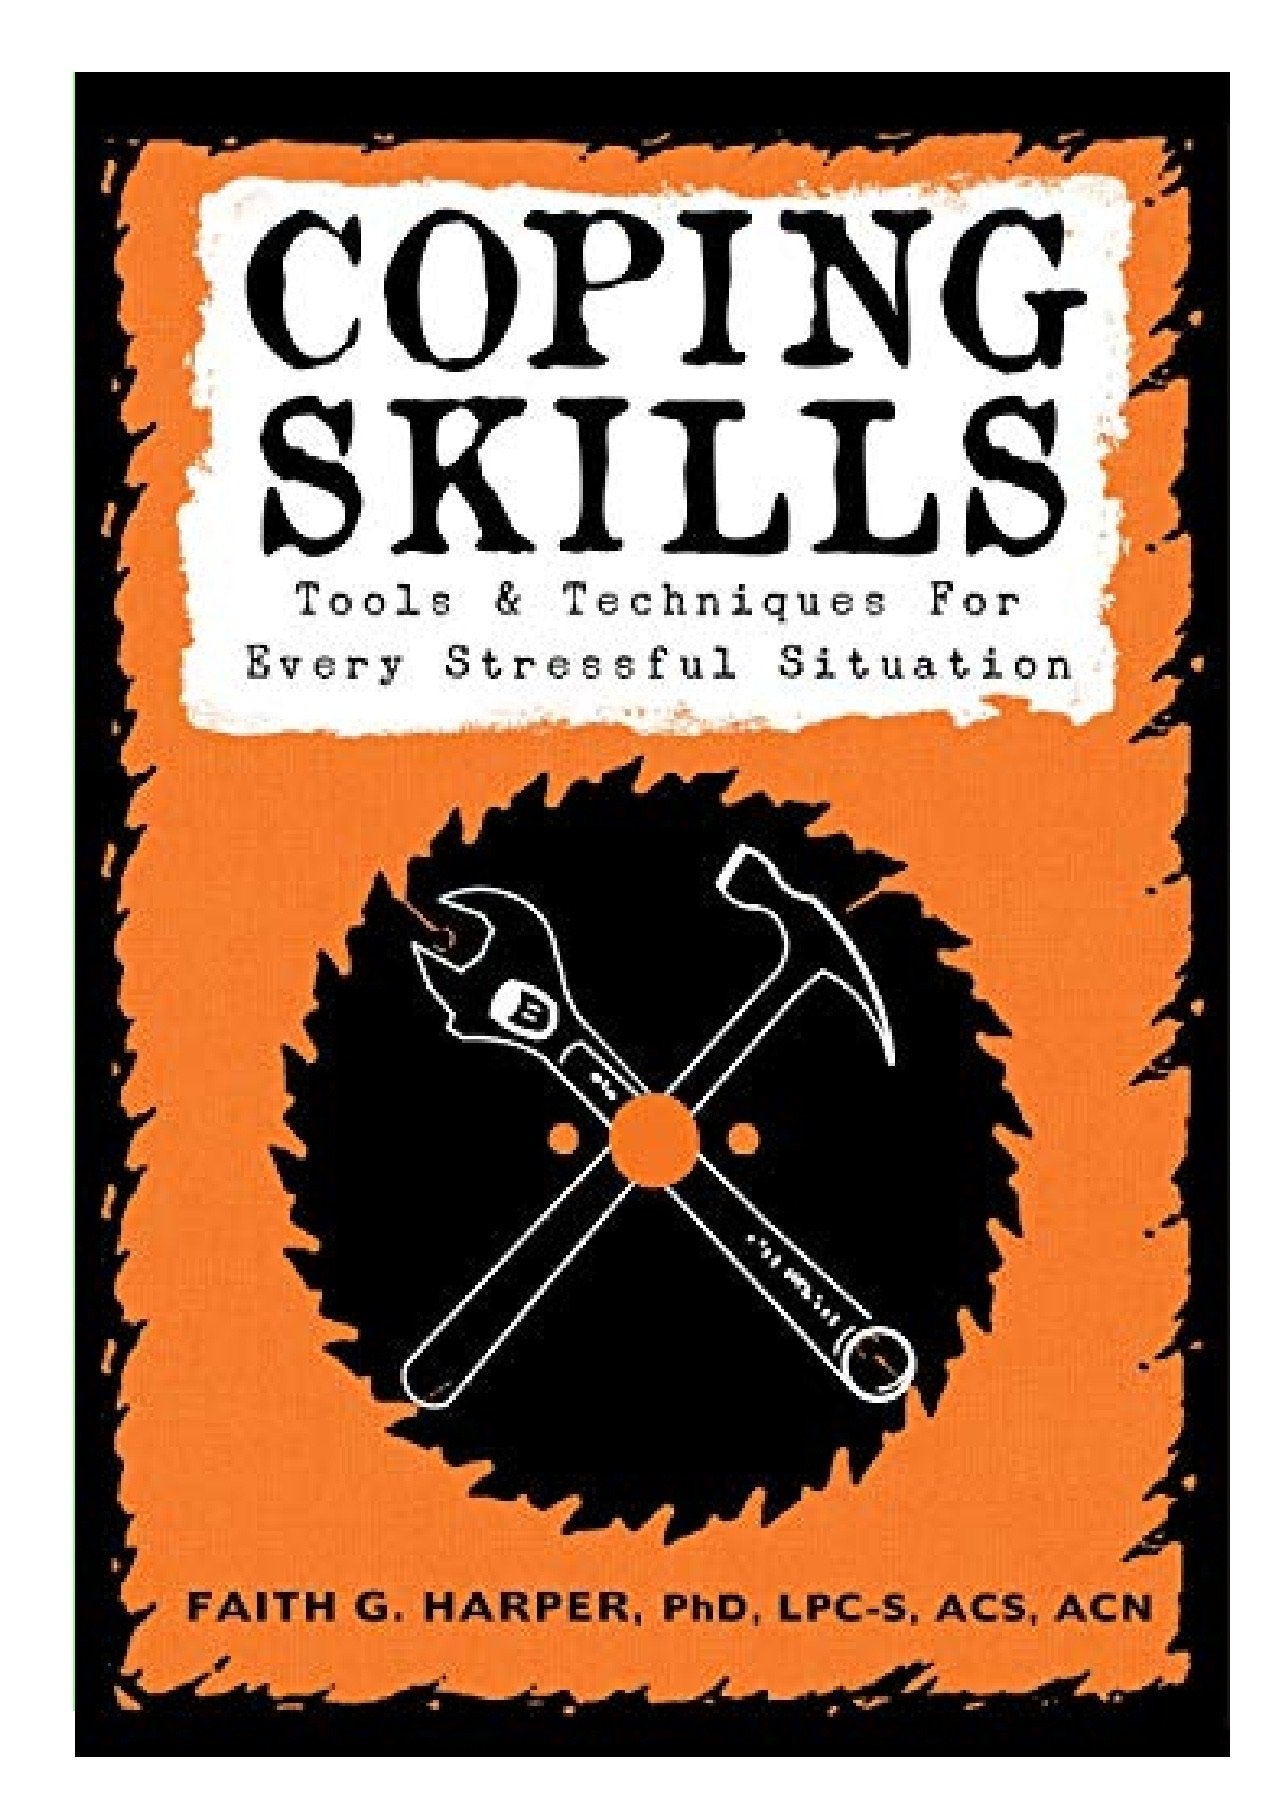 Cover of Coping Skills , Tools and Techniques for every stressful situation by Faith Harper.